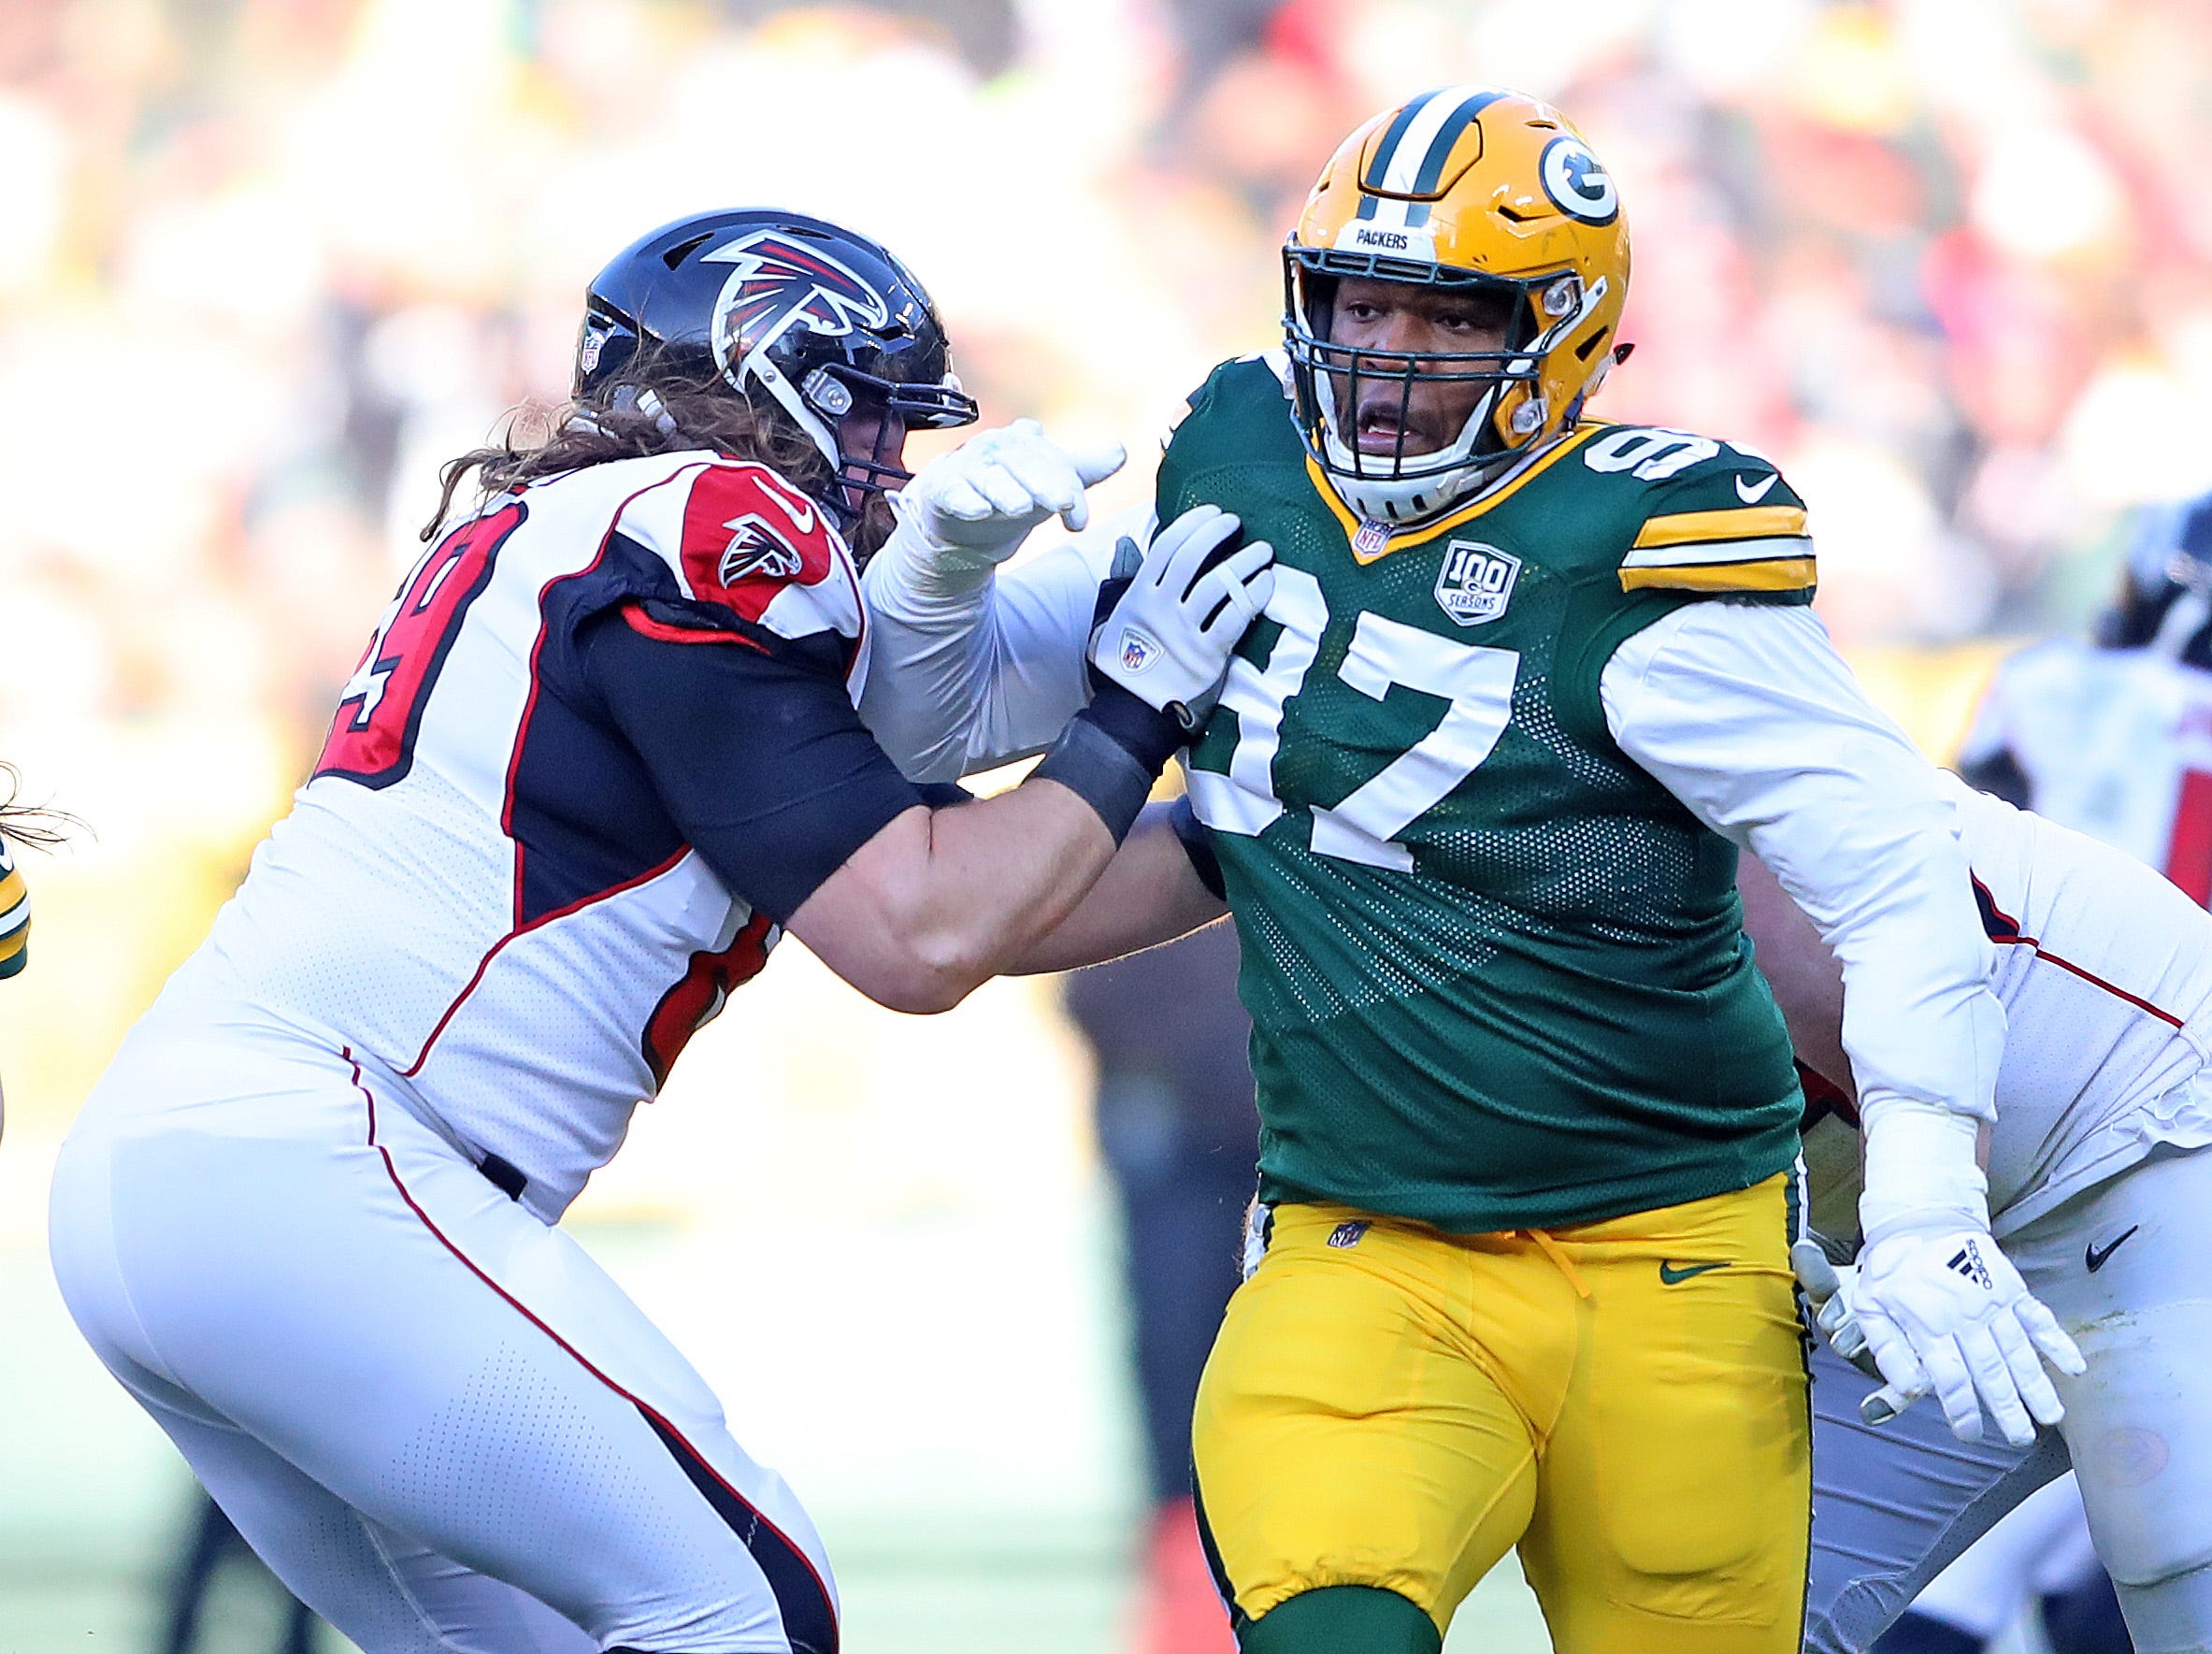 Green Bay Packers nose tackle Kenny Clark (97) crashes through the defense against the Atlanta Falcons Sunday, December 9, 2018 at Lambeau Field in Green Bay, Wis.